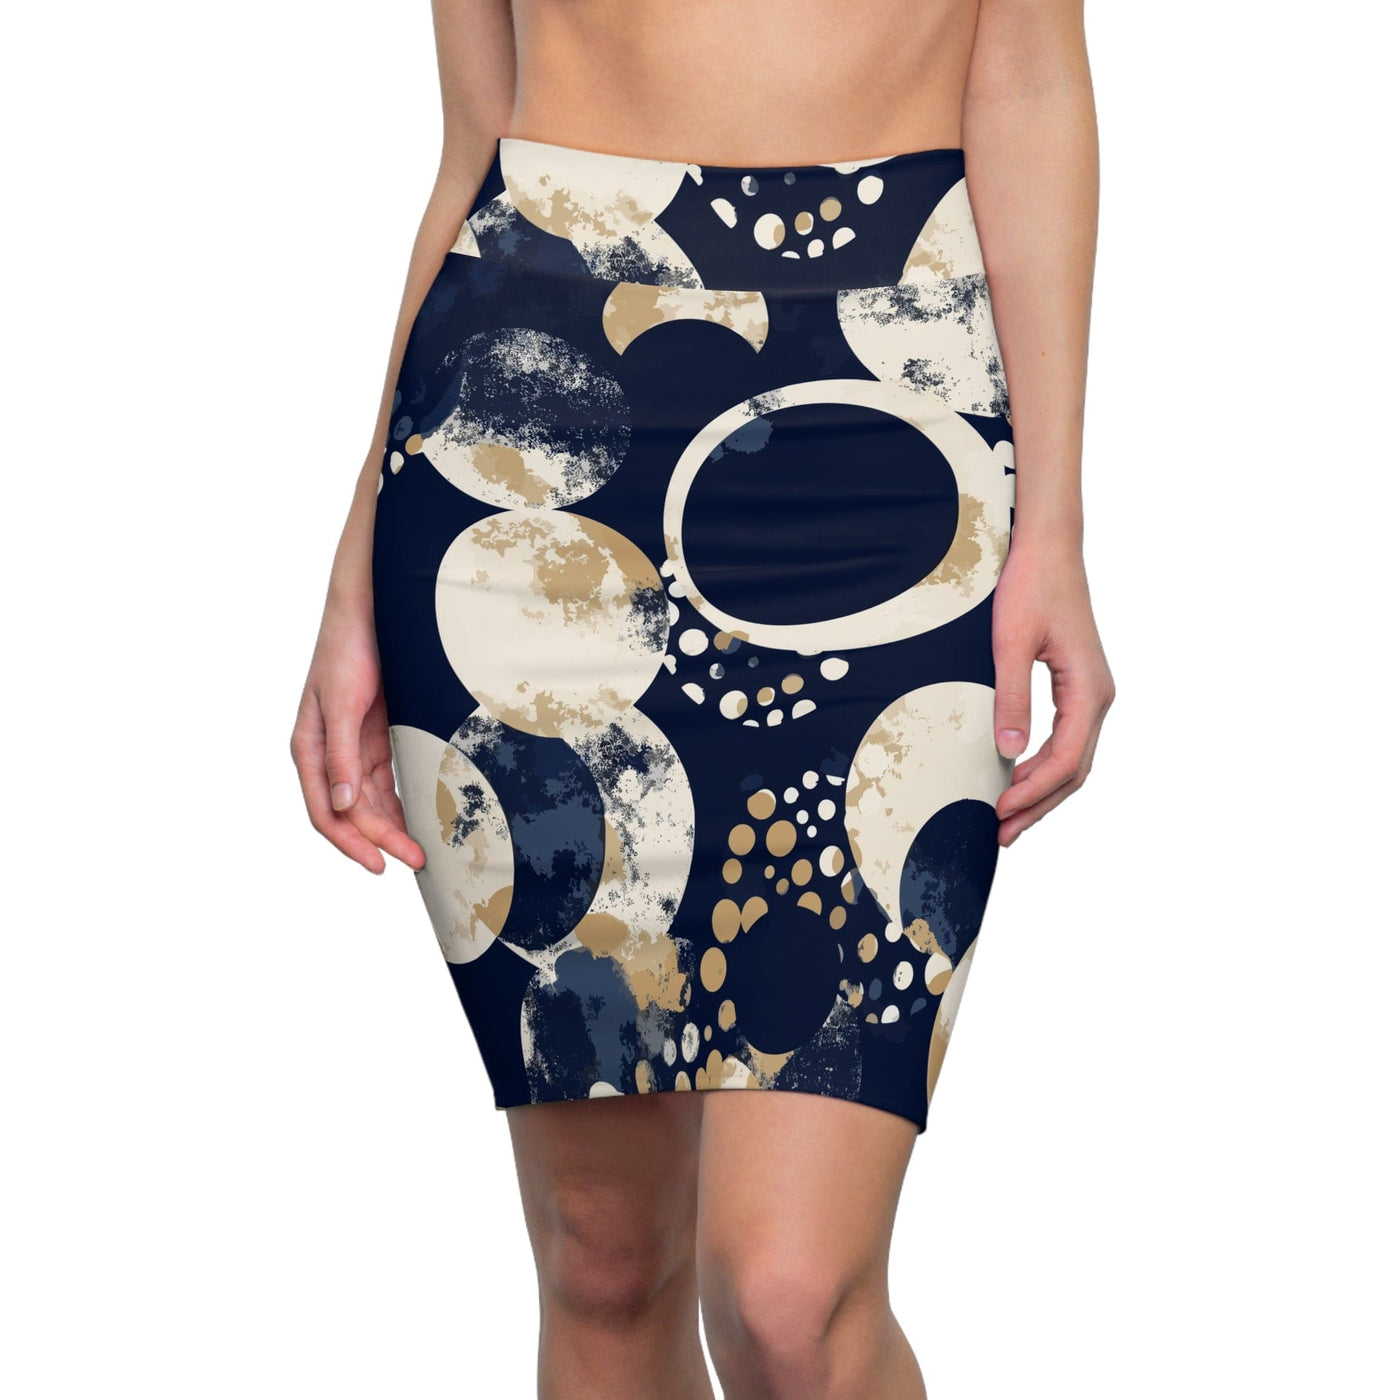 High Waist Womens Pencil Skirt - Contour Stretch - Navy Blue And Beige Spotted